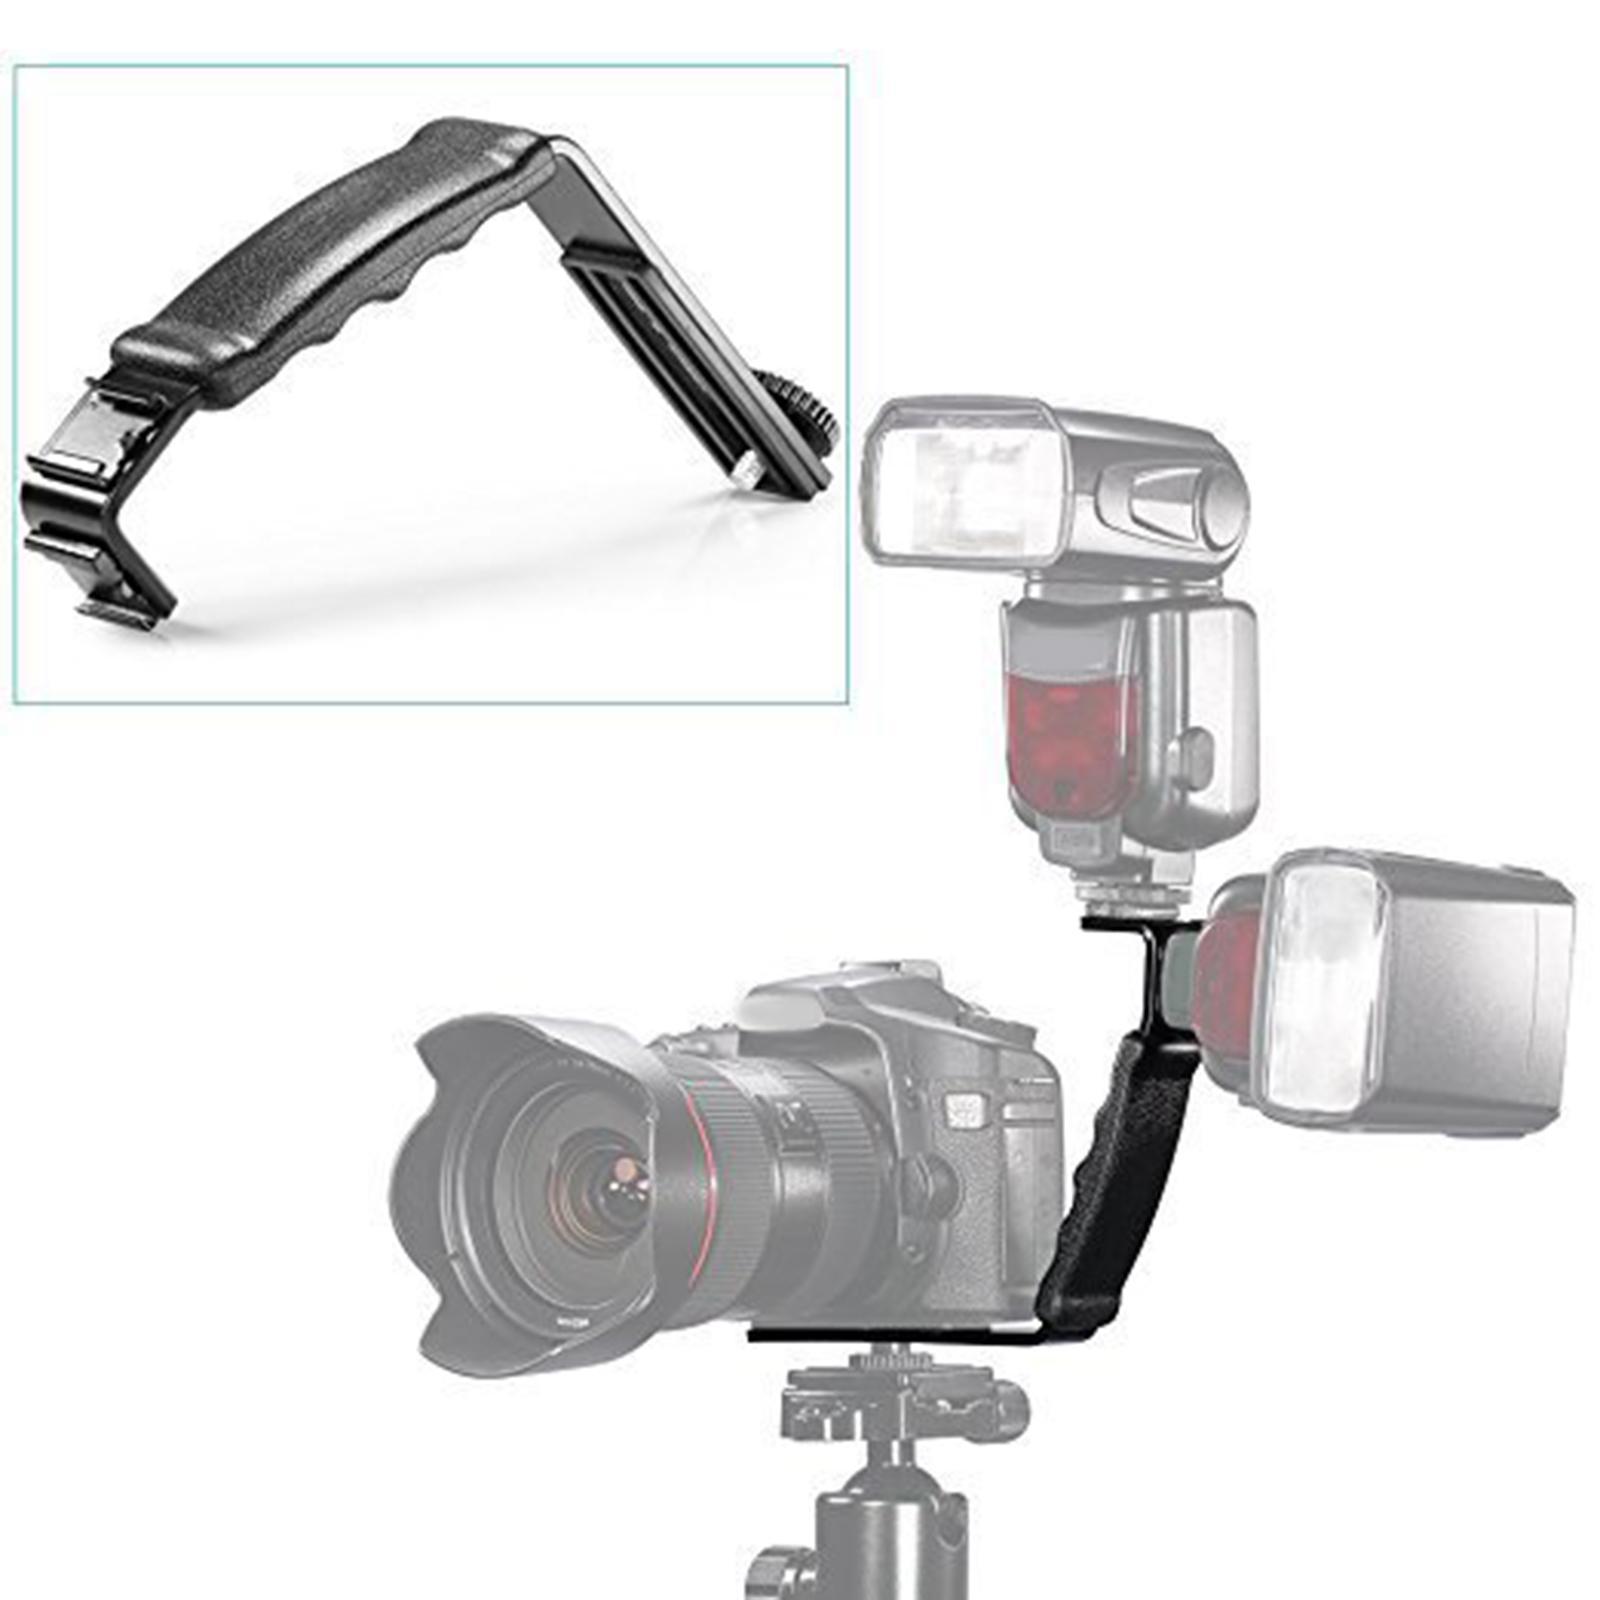 L Bracket Camera Photography L Bracket for Microphone Gimbal Stabilizers Slr